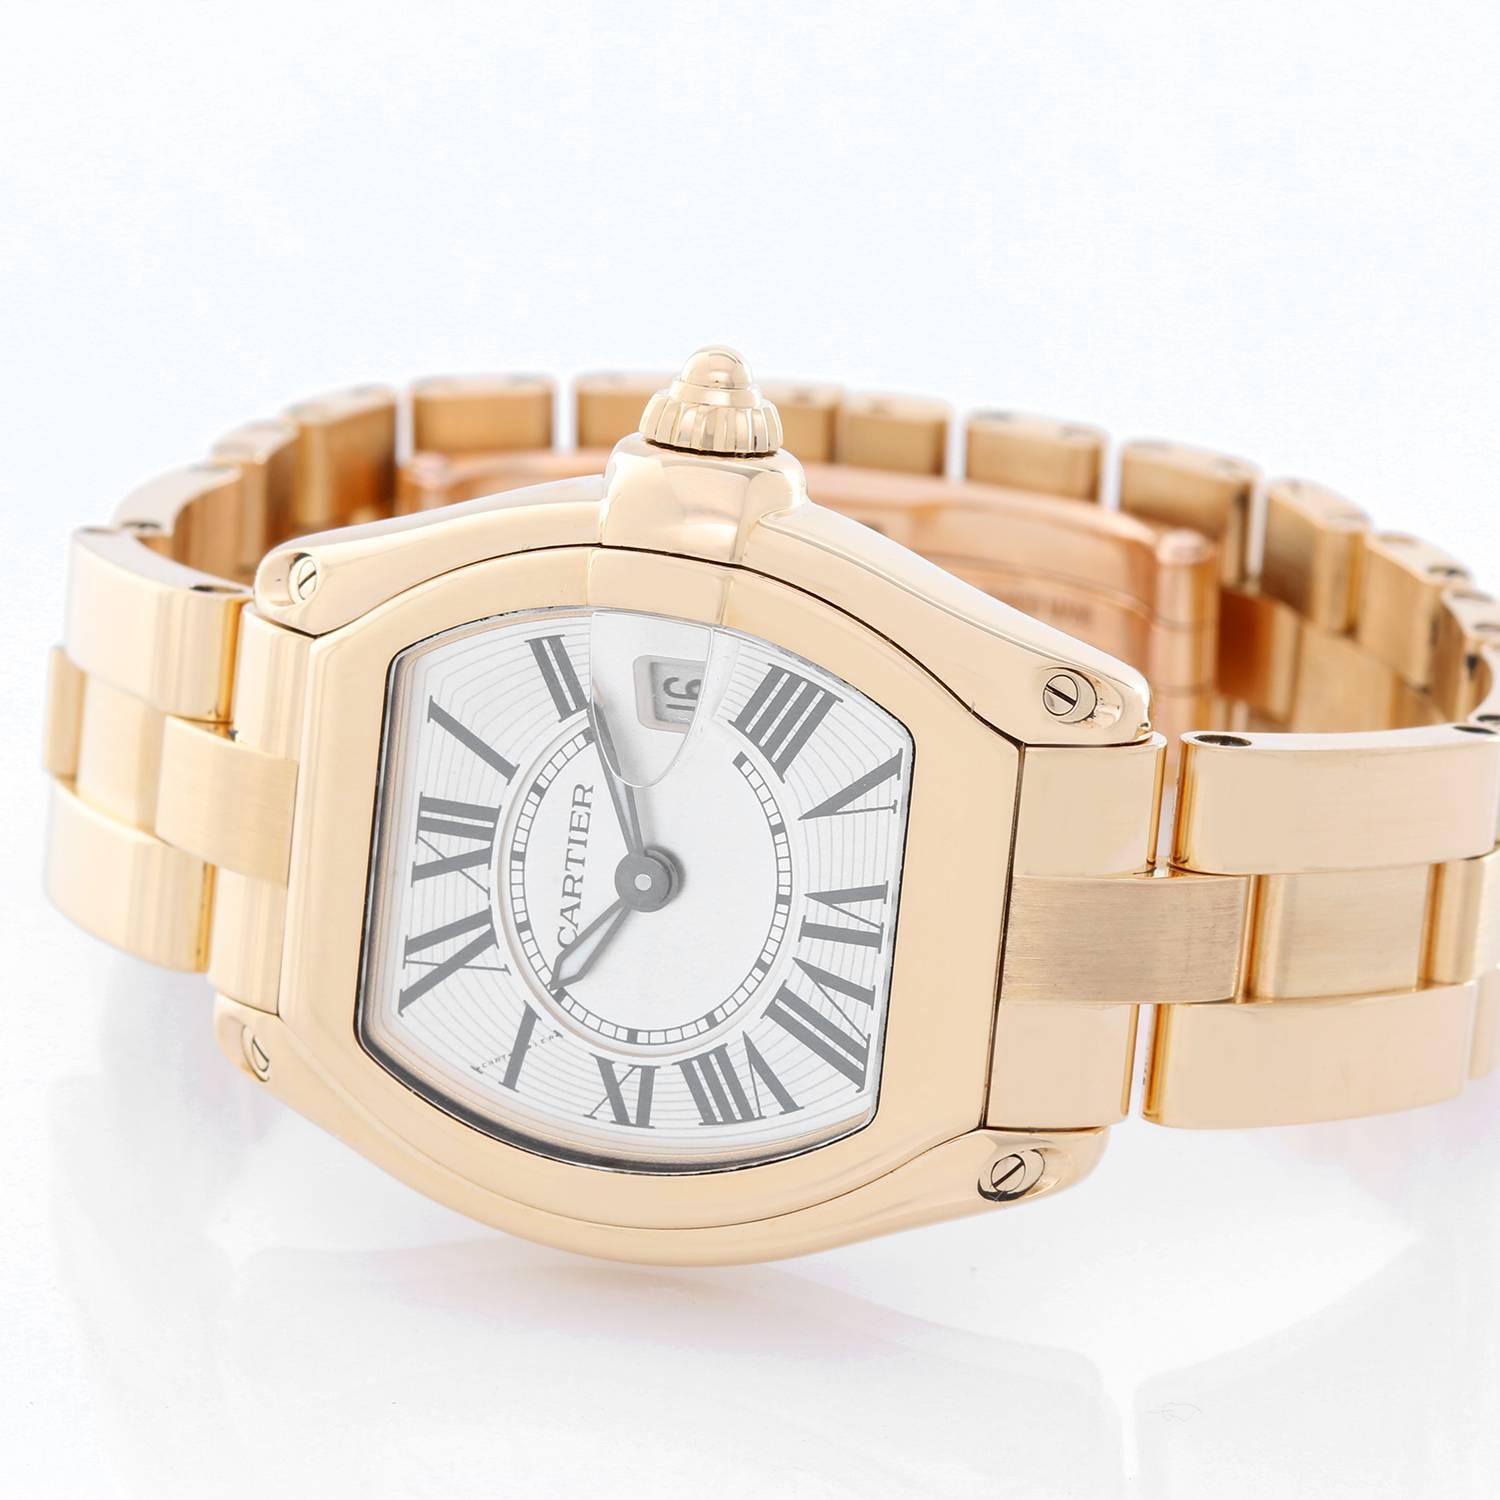 Cartier Roadster 18k Yellow Gold W62018V1 -  Quartz. 18k yellow gold tonneau style case (31mm x 37mm). Silvered guilloche dial with black Roman numerals; date at 3 o'clock. 18k yellow gold Cartier bracelet with deployant clasp. Pre-owned with